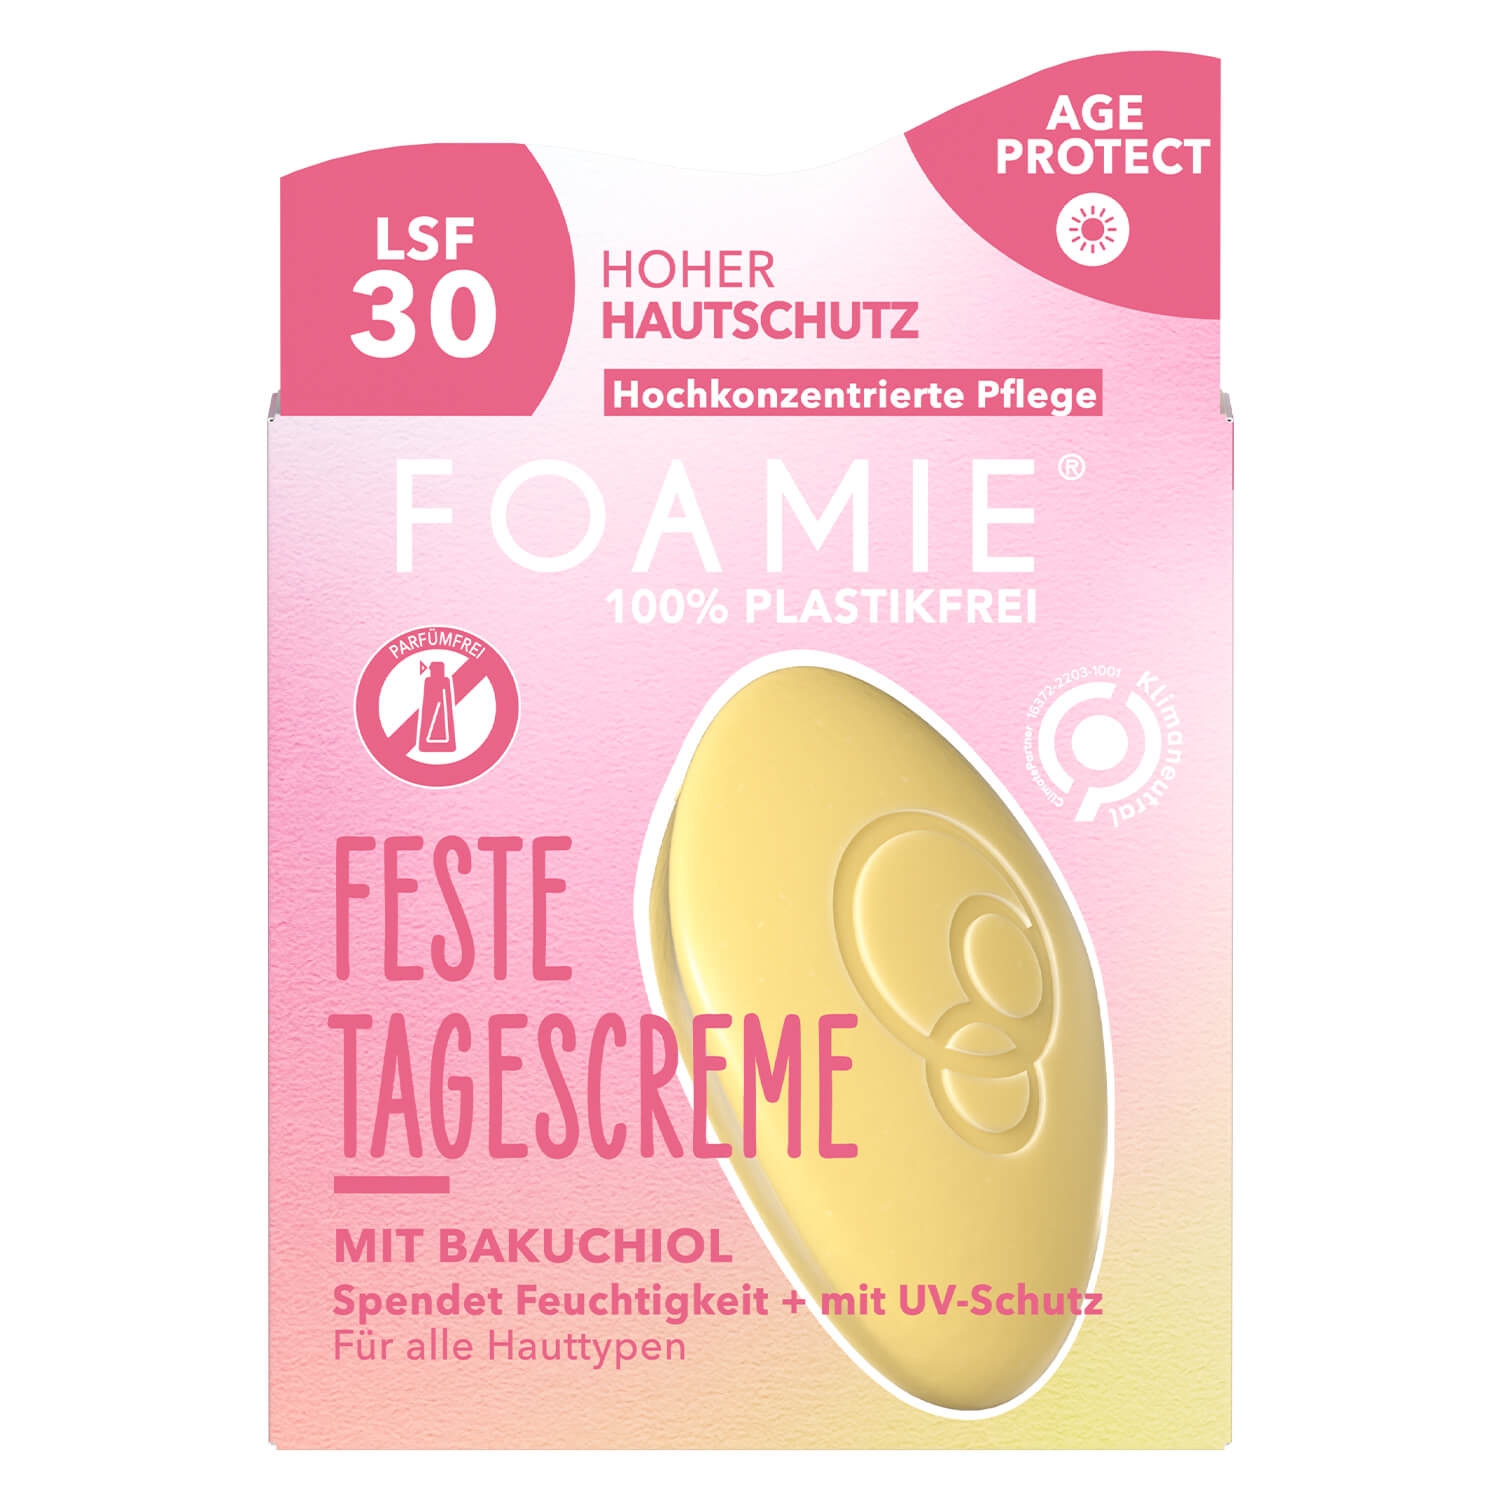 Product image from Foamie - Feste Tagescreme Ages Protect